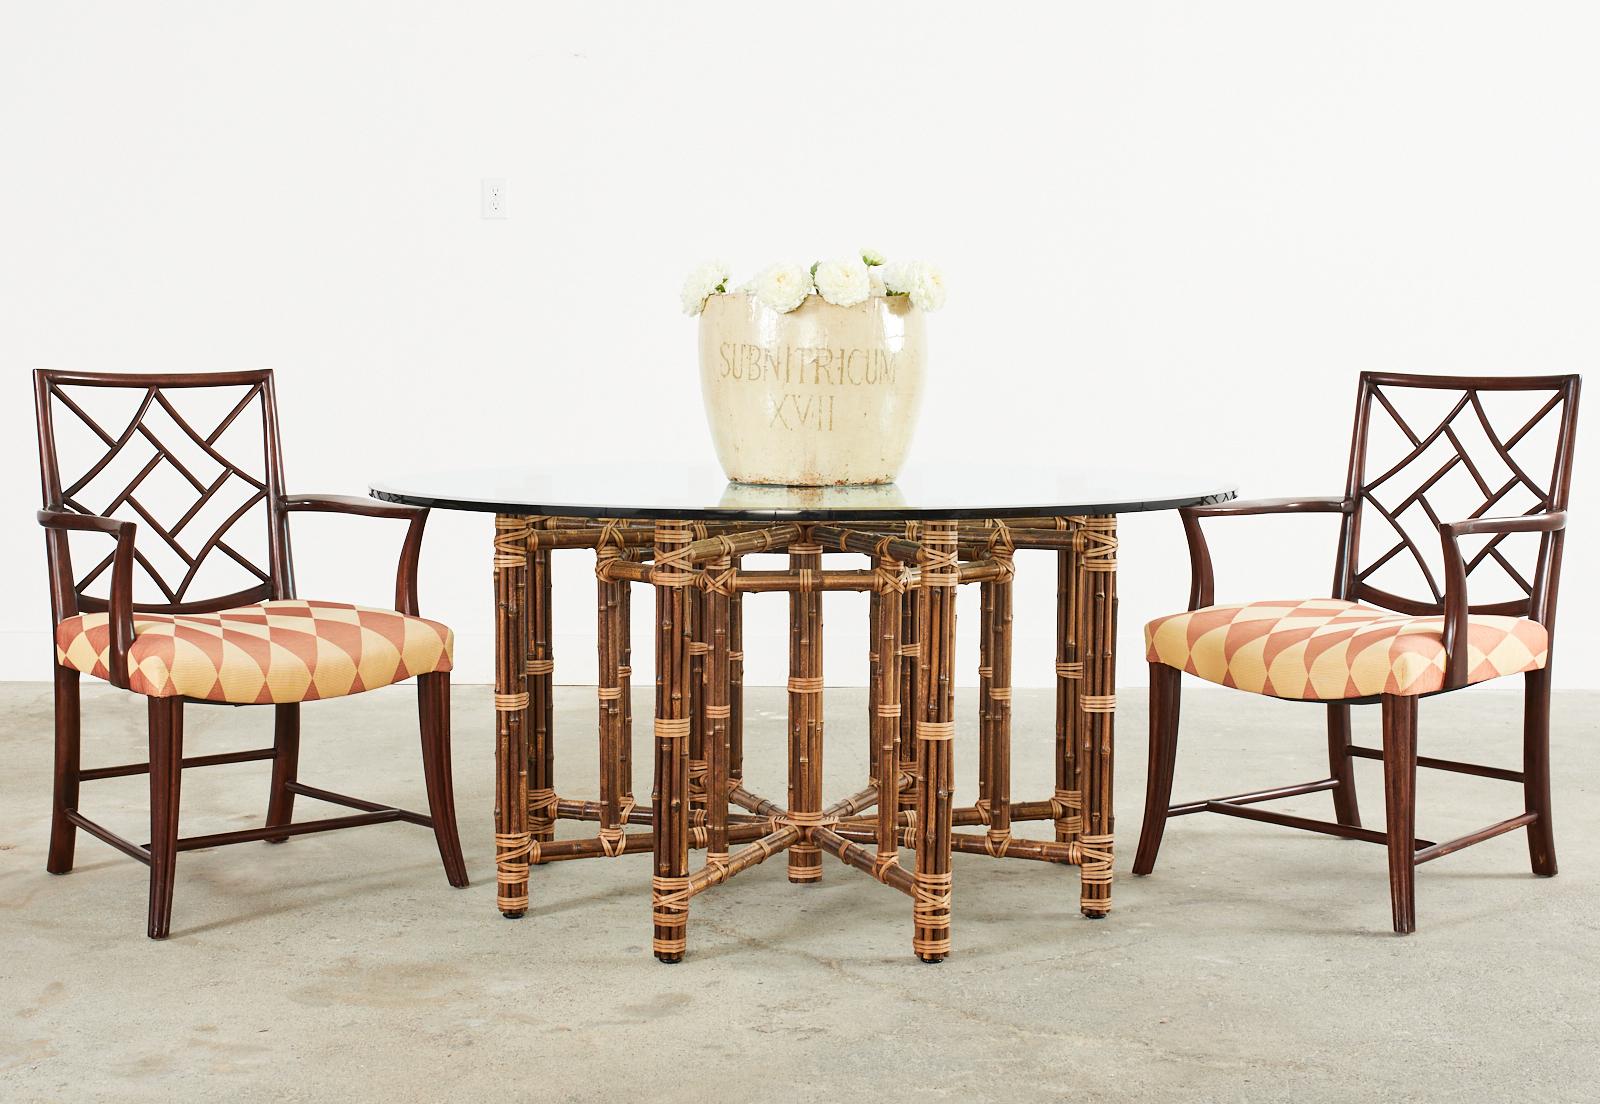 Amazing McGuire organic modern bamboo rattan dining table featuring an octagonal base seating for eight. Genuine McGuire, not a cheap reproduction with an iron frame painted golden gate orange for authenticity. Made in the California organic modern